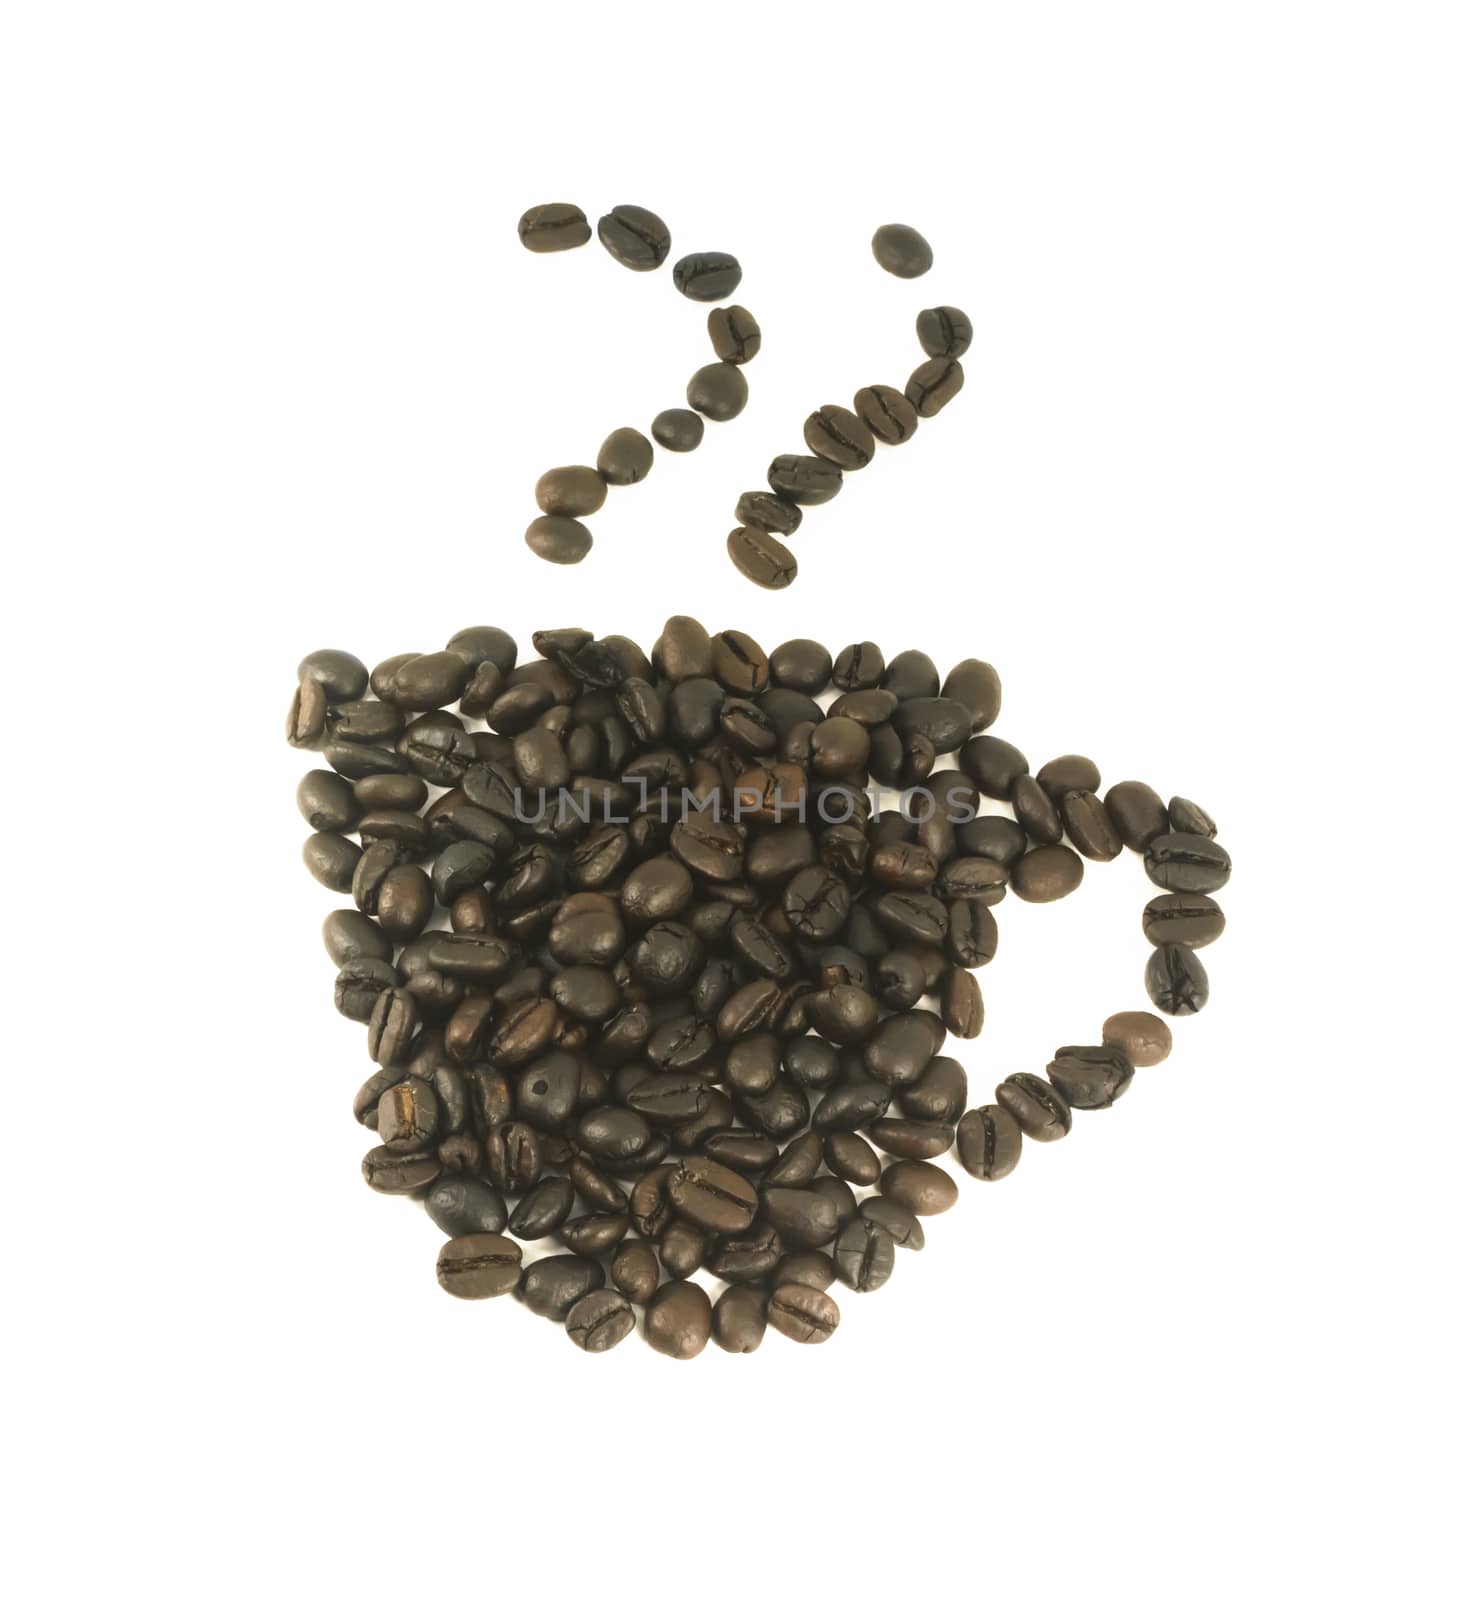 A cup of coffee made from beans isolated on white background